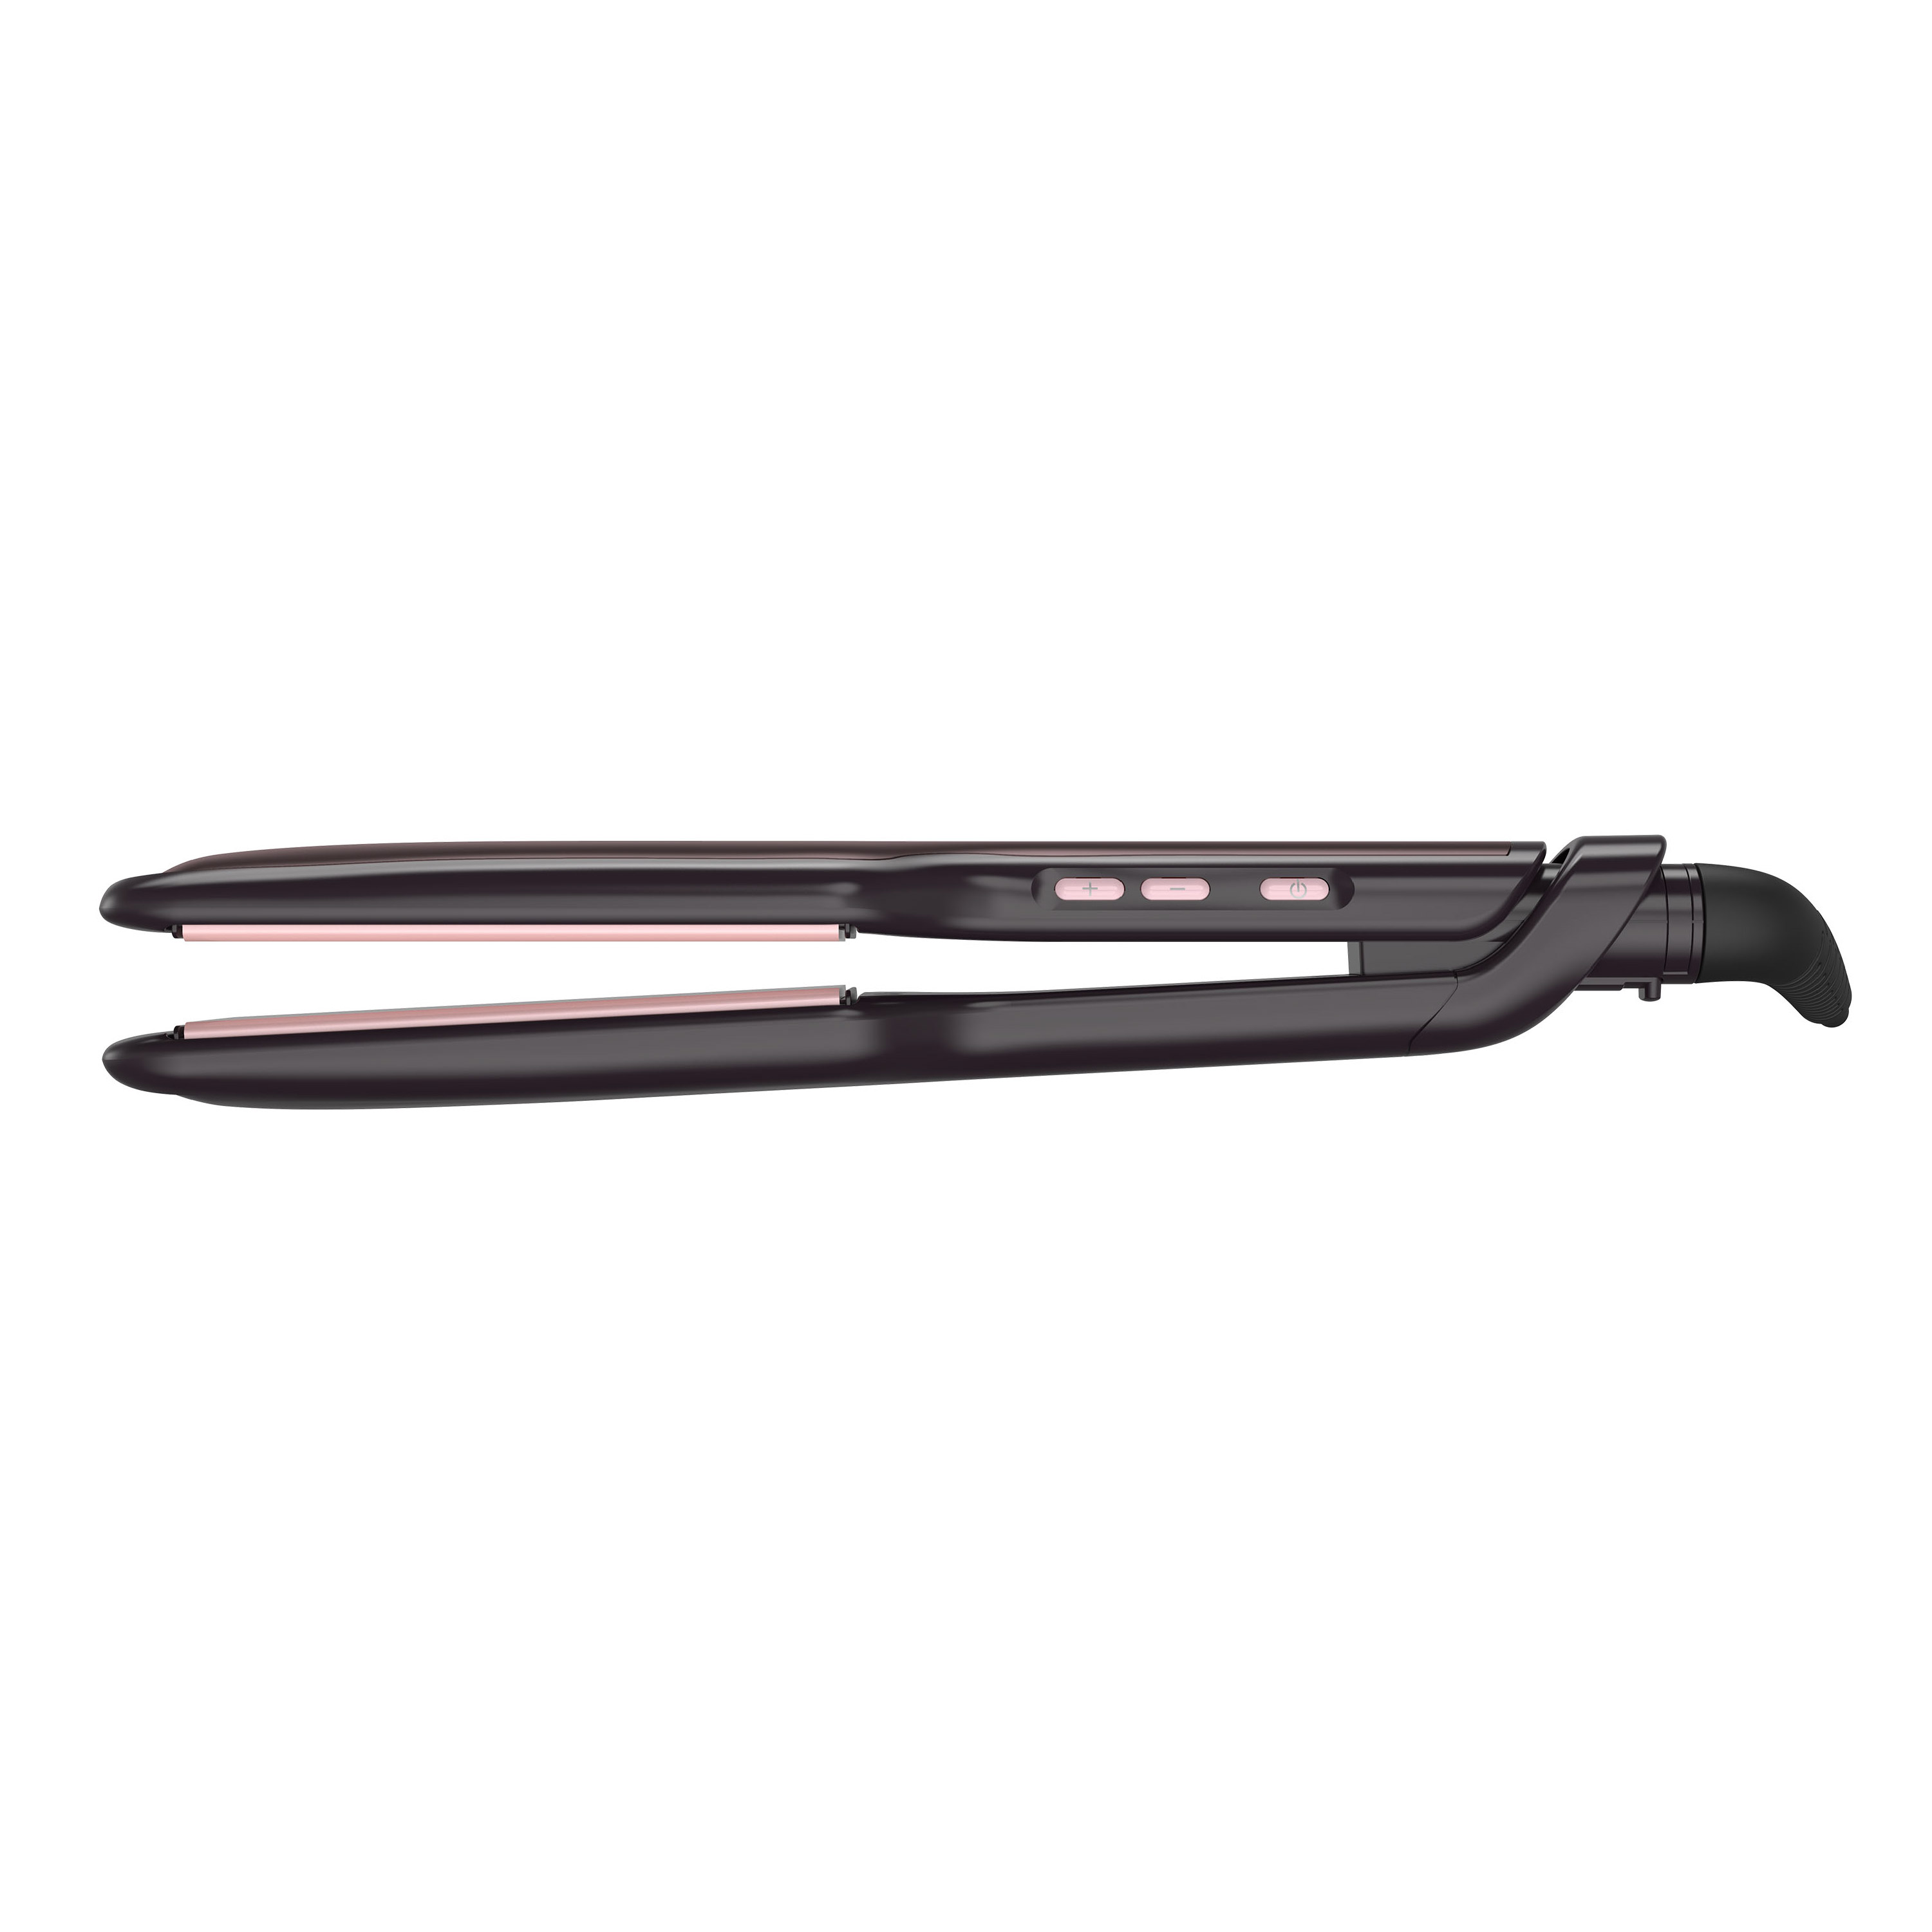 Remington Pro Soft Touch Finish and Digital Controls Professional 2" Pearl Ceramic Flat Iron Hair Straightener, Black - image 14 of 15